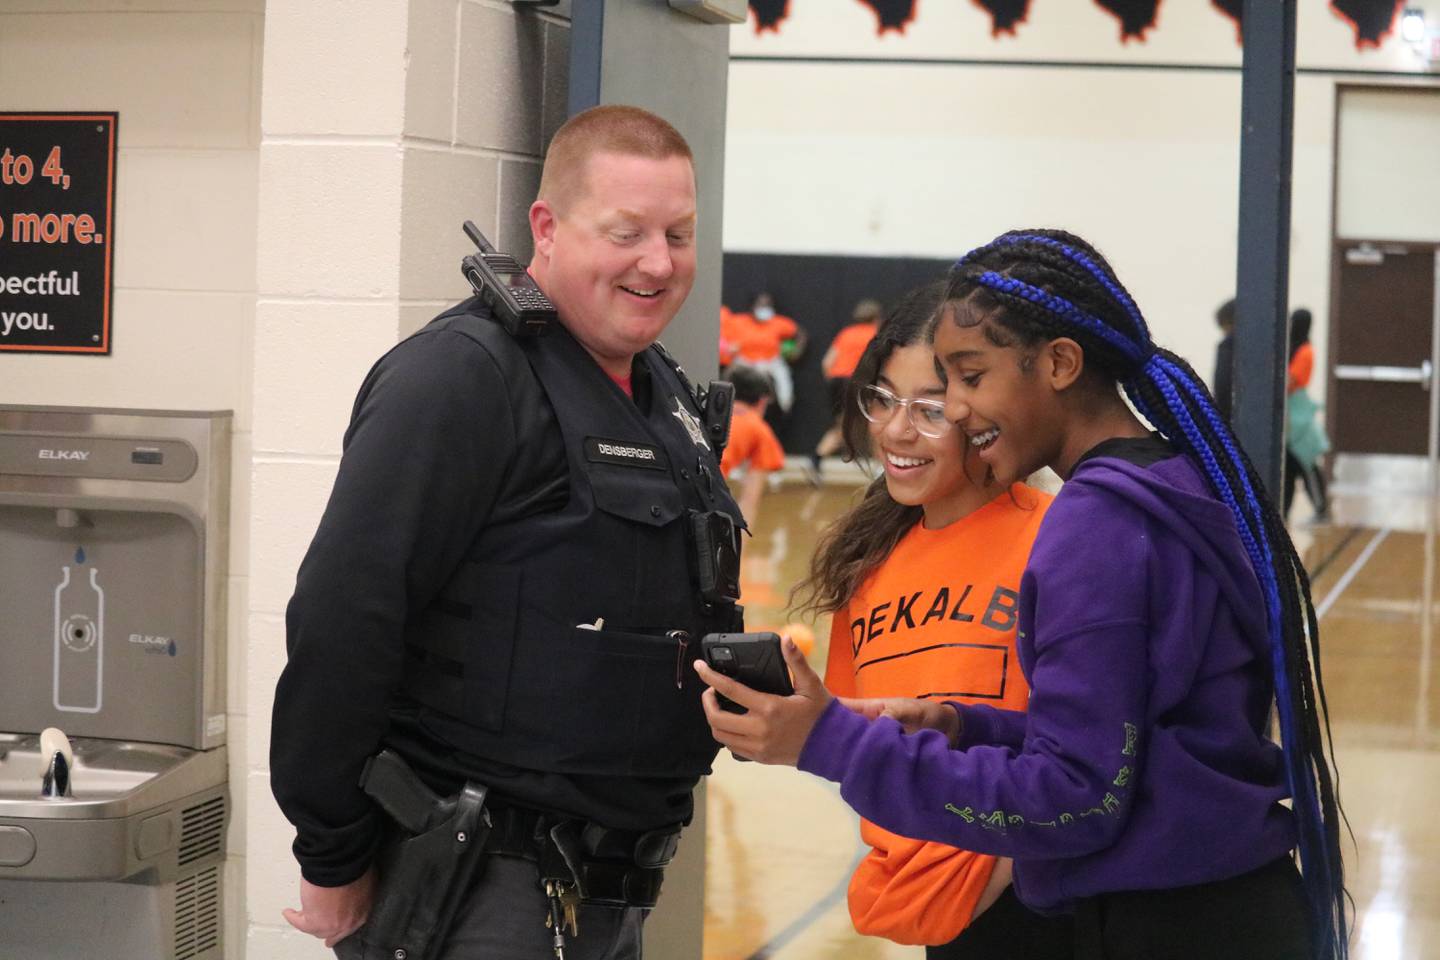 School Resource Officer Tony Densberger (left) is seen Oct. 20, 2022 with Keniyah Stevenson and Briana Elion (right) at Clinton Rosette Middle School in DeKalb.